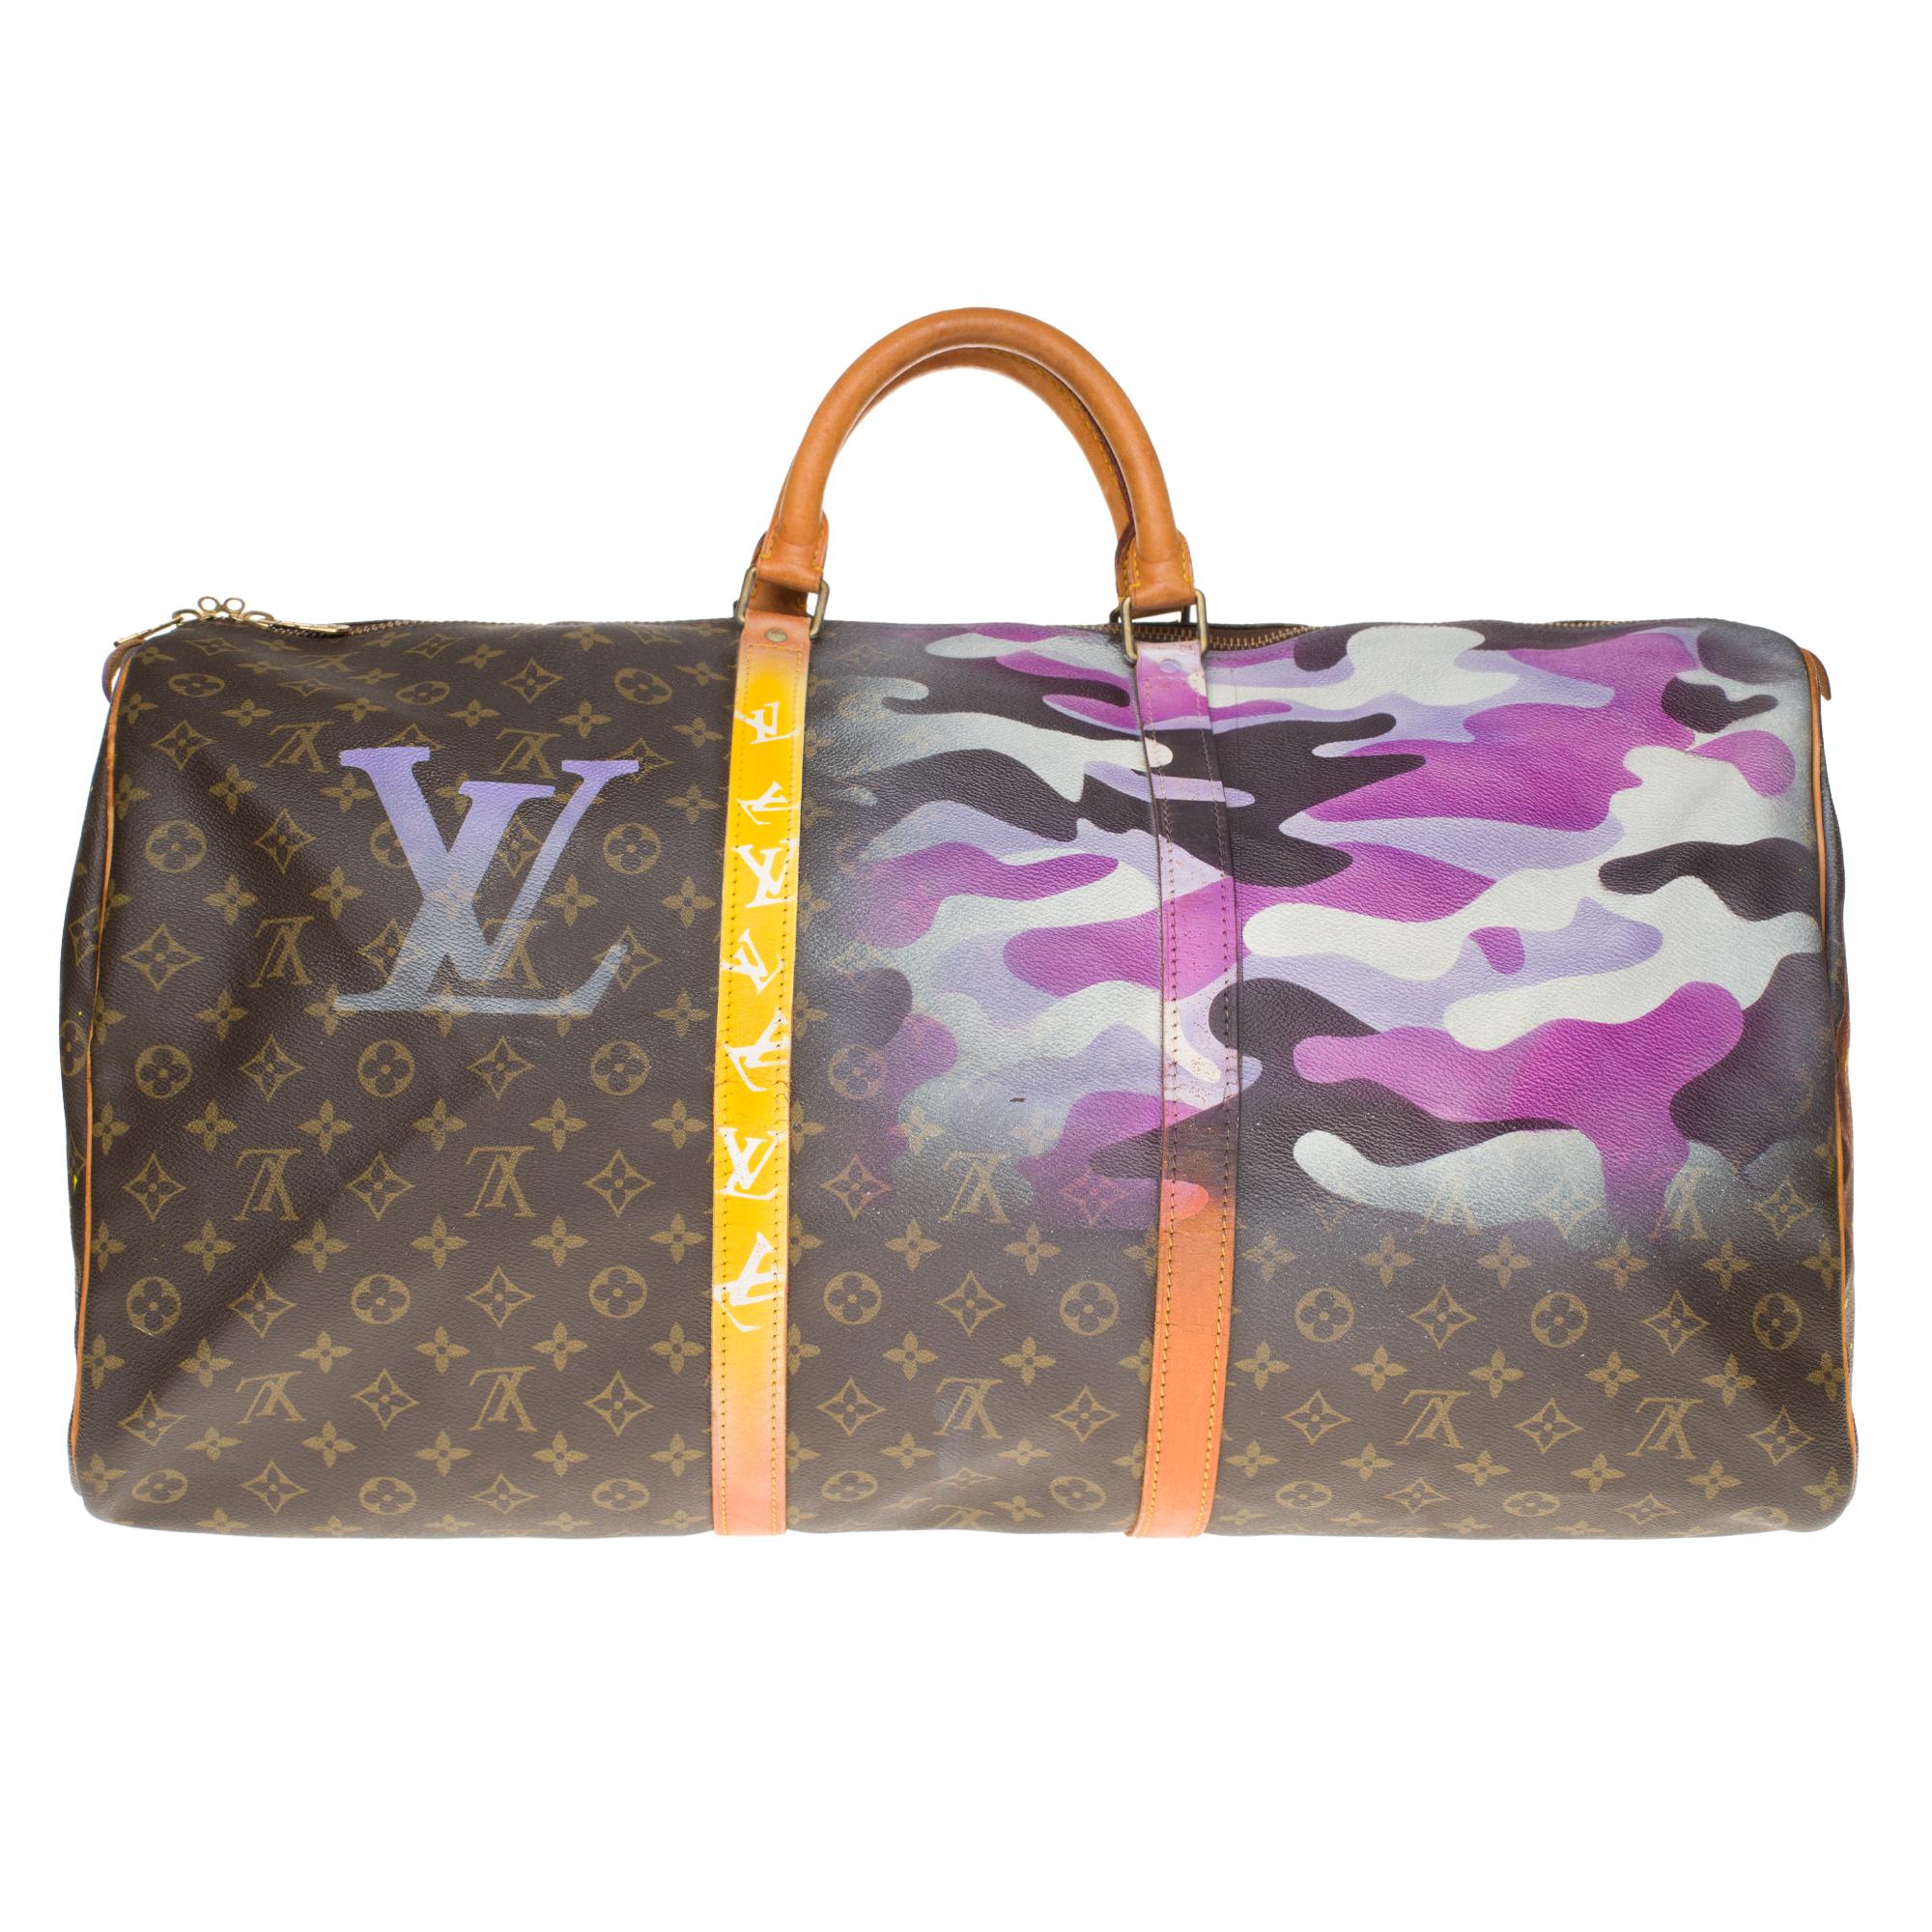 Exceptional travel bag Louis Vuitton Keepall 60 cm in brown Monogram canvas and natural leather customized 